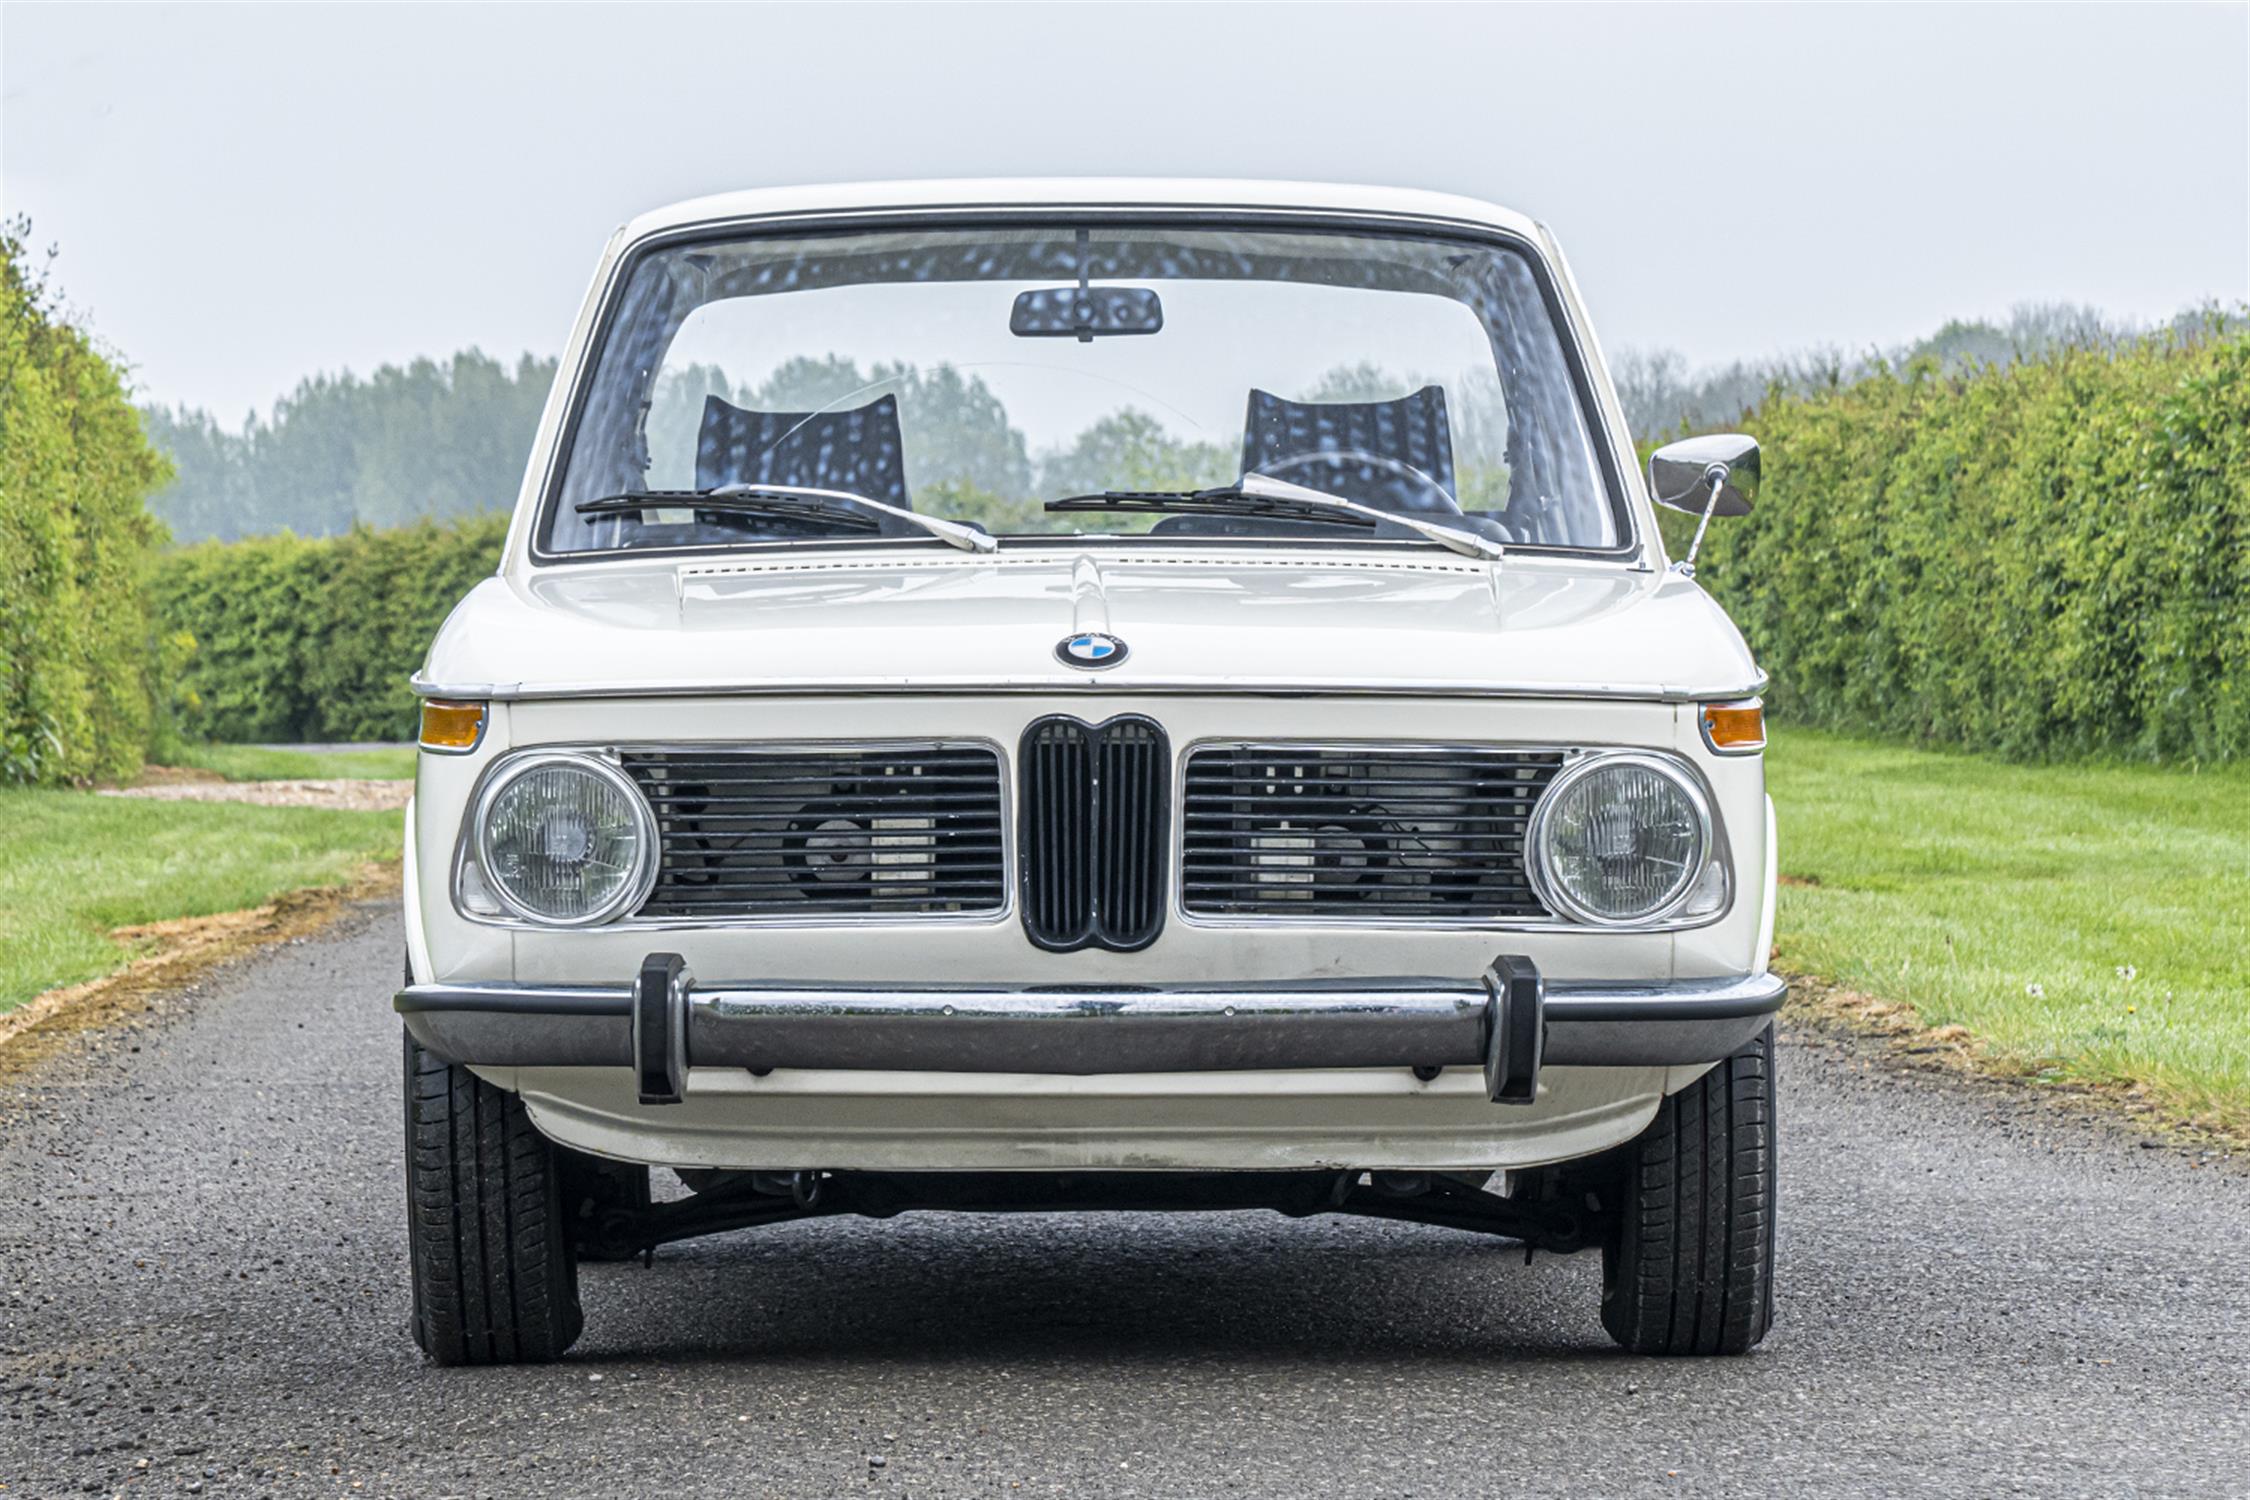 1972 BMW 2002 Tii - Image 5 of 10